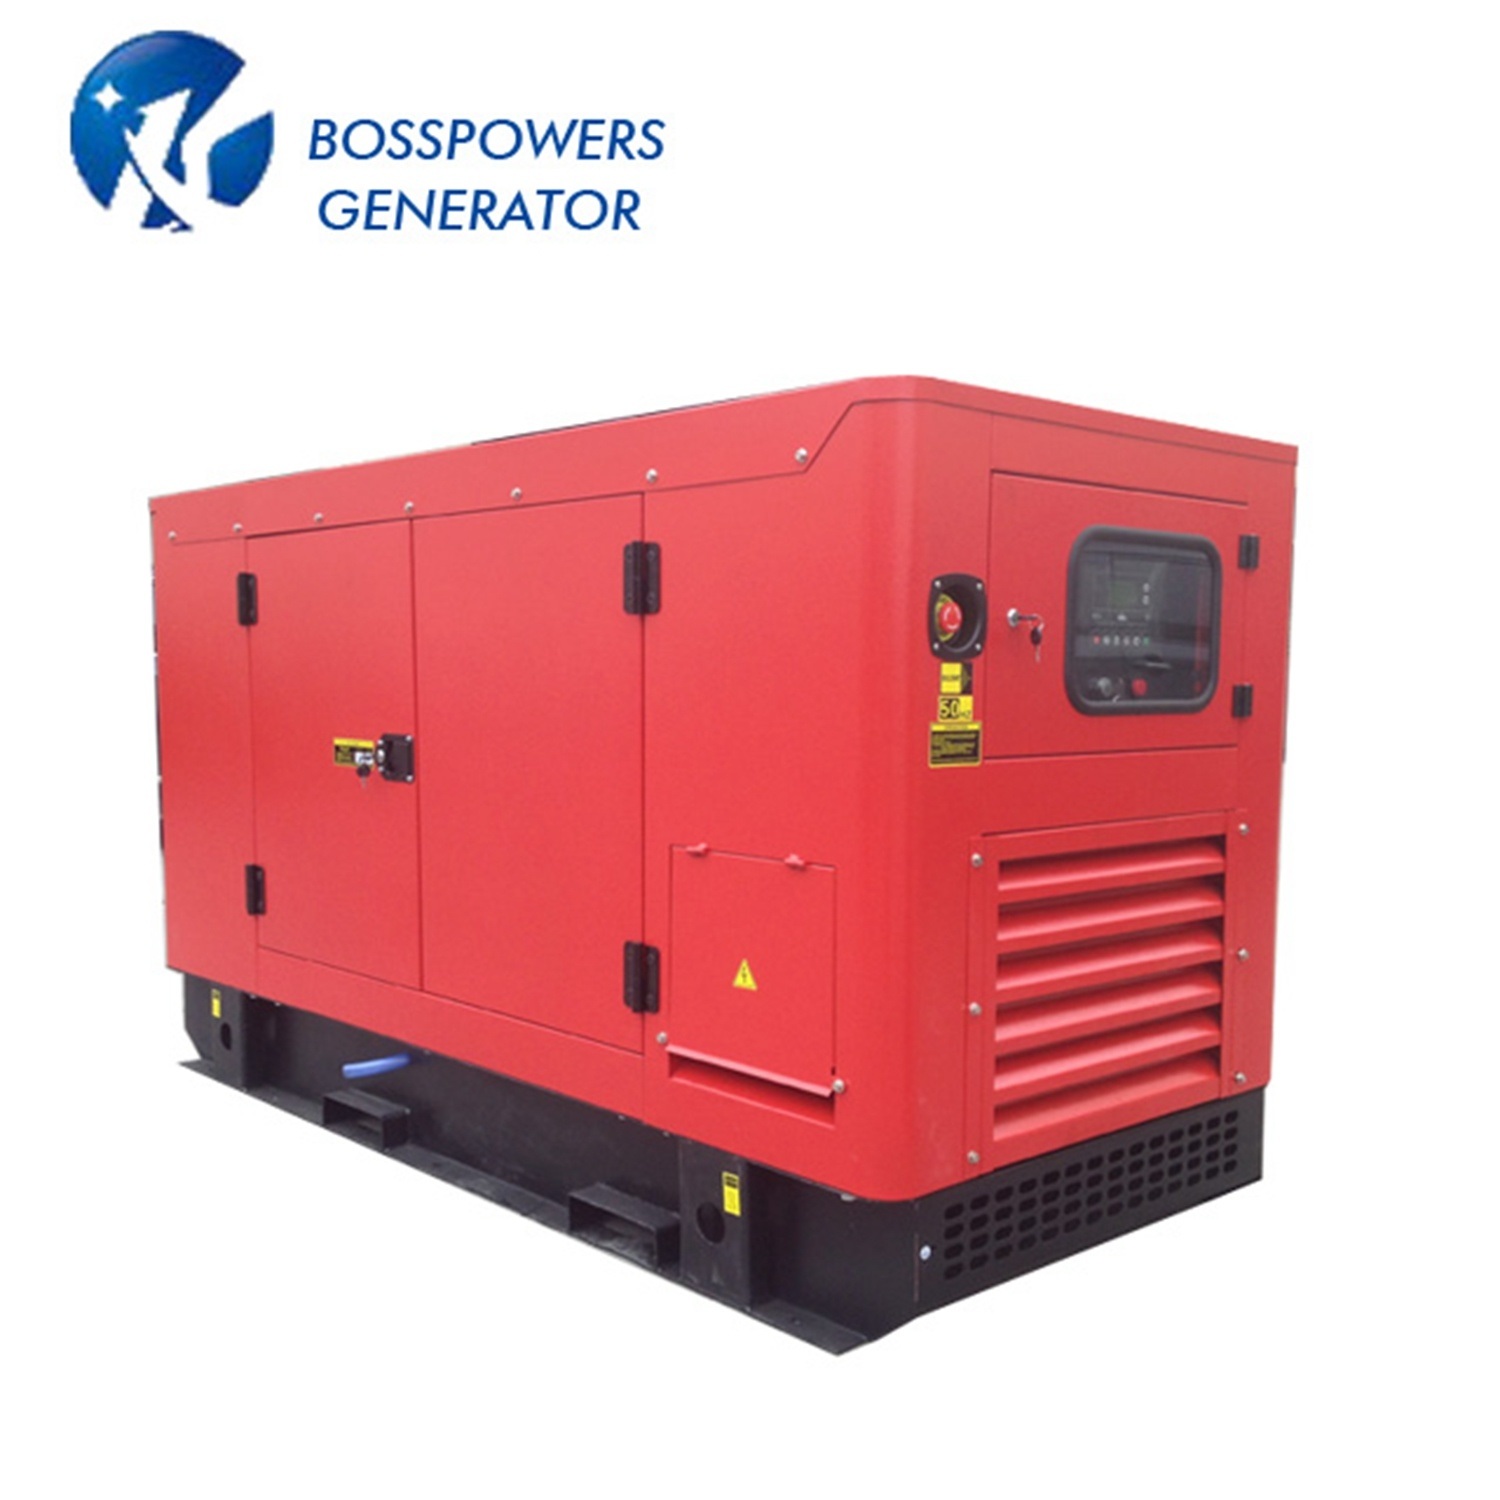 Three-Phase 50Hz/60Hz Diesel Generator Powered by 3tnv82A-Gge Made in Japan